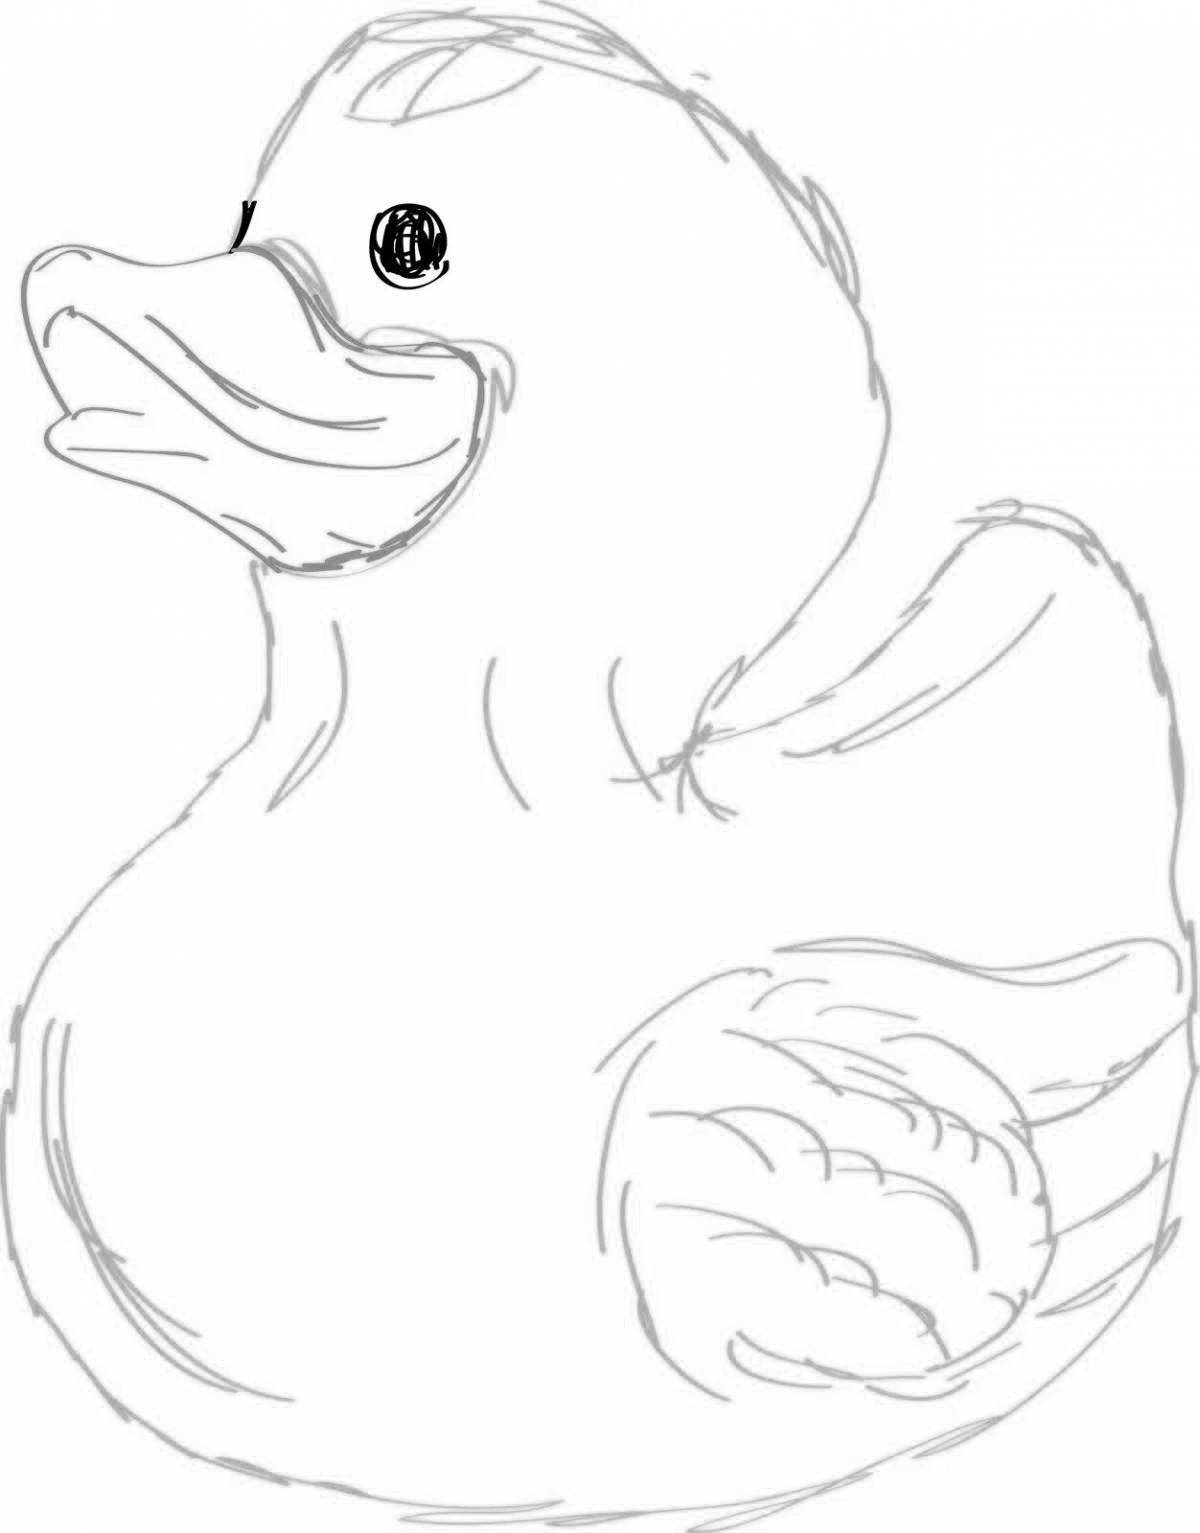 Playful duck coloring page by tik tok